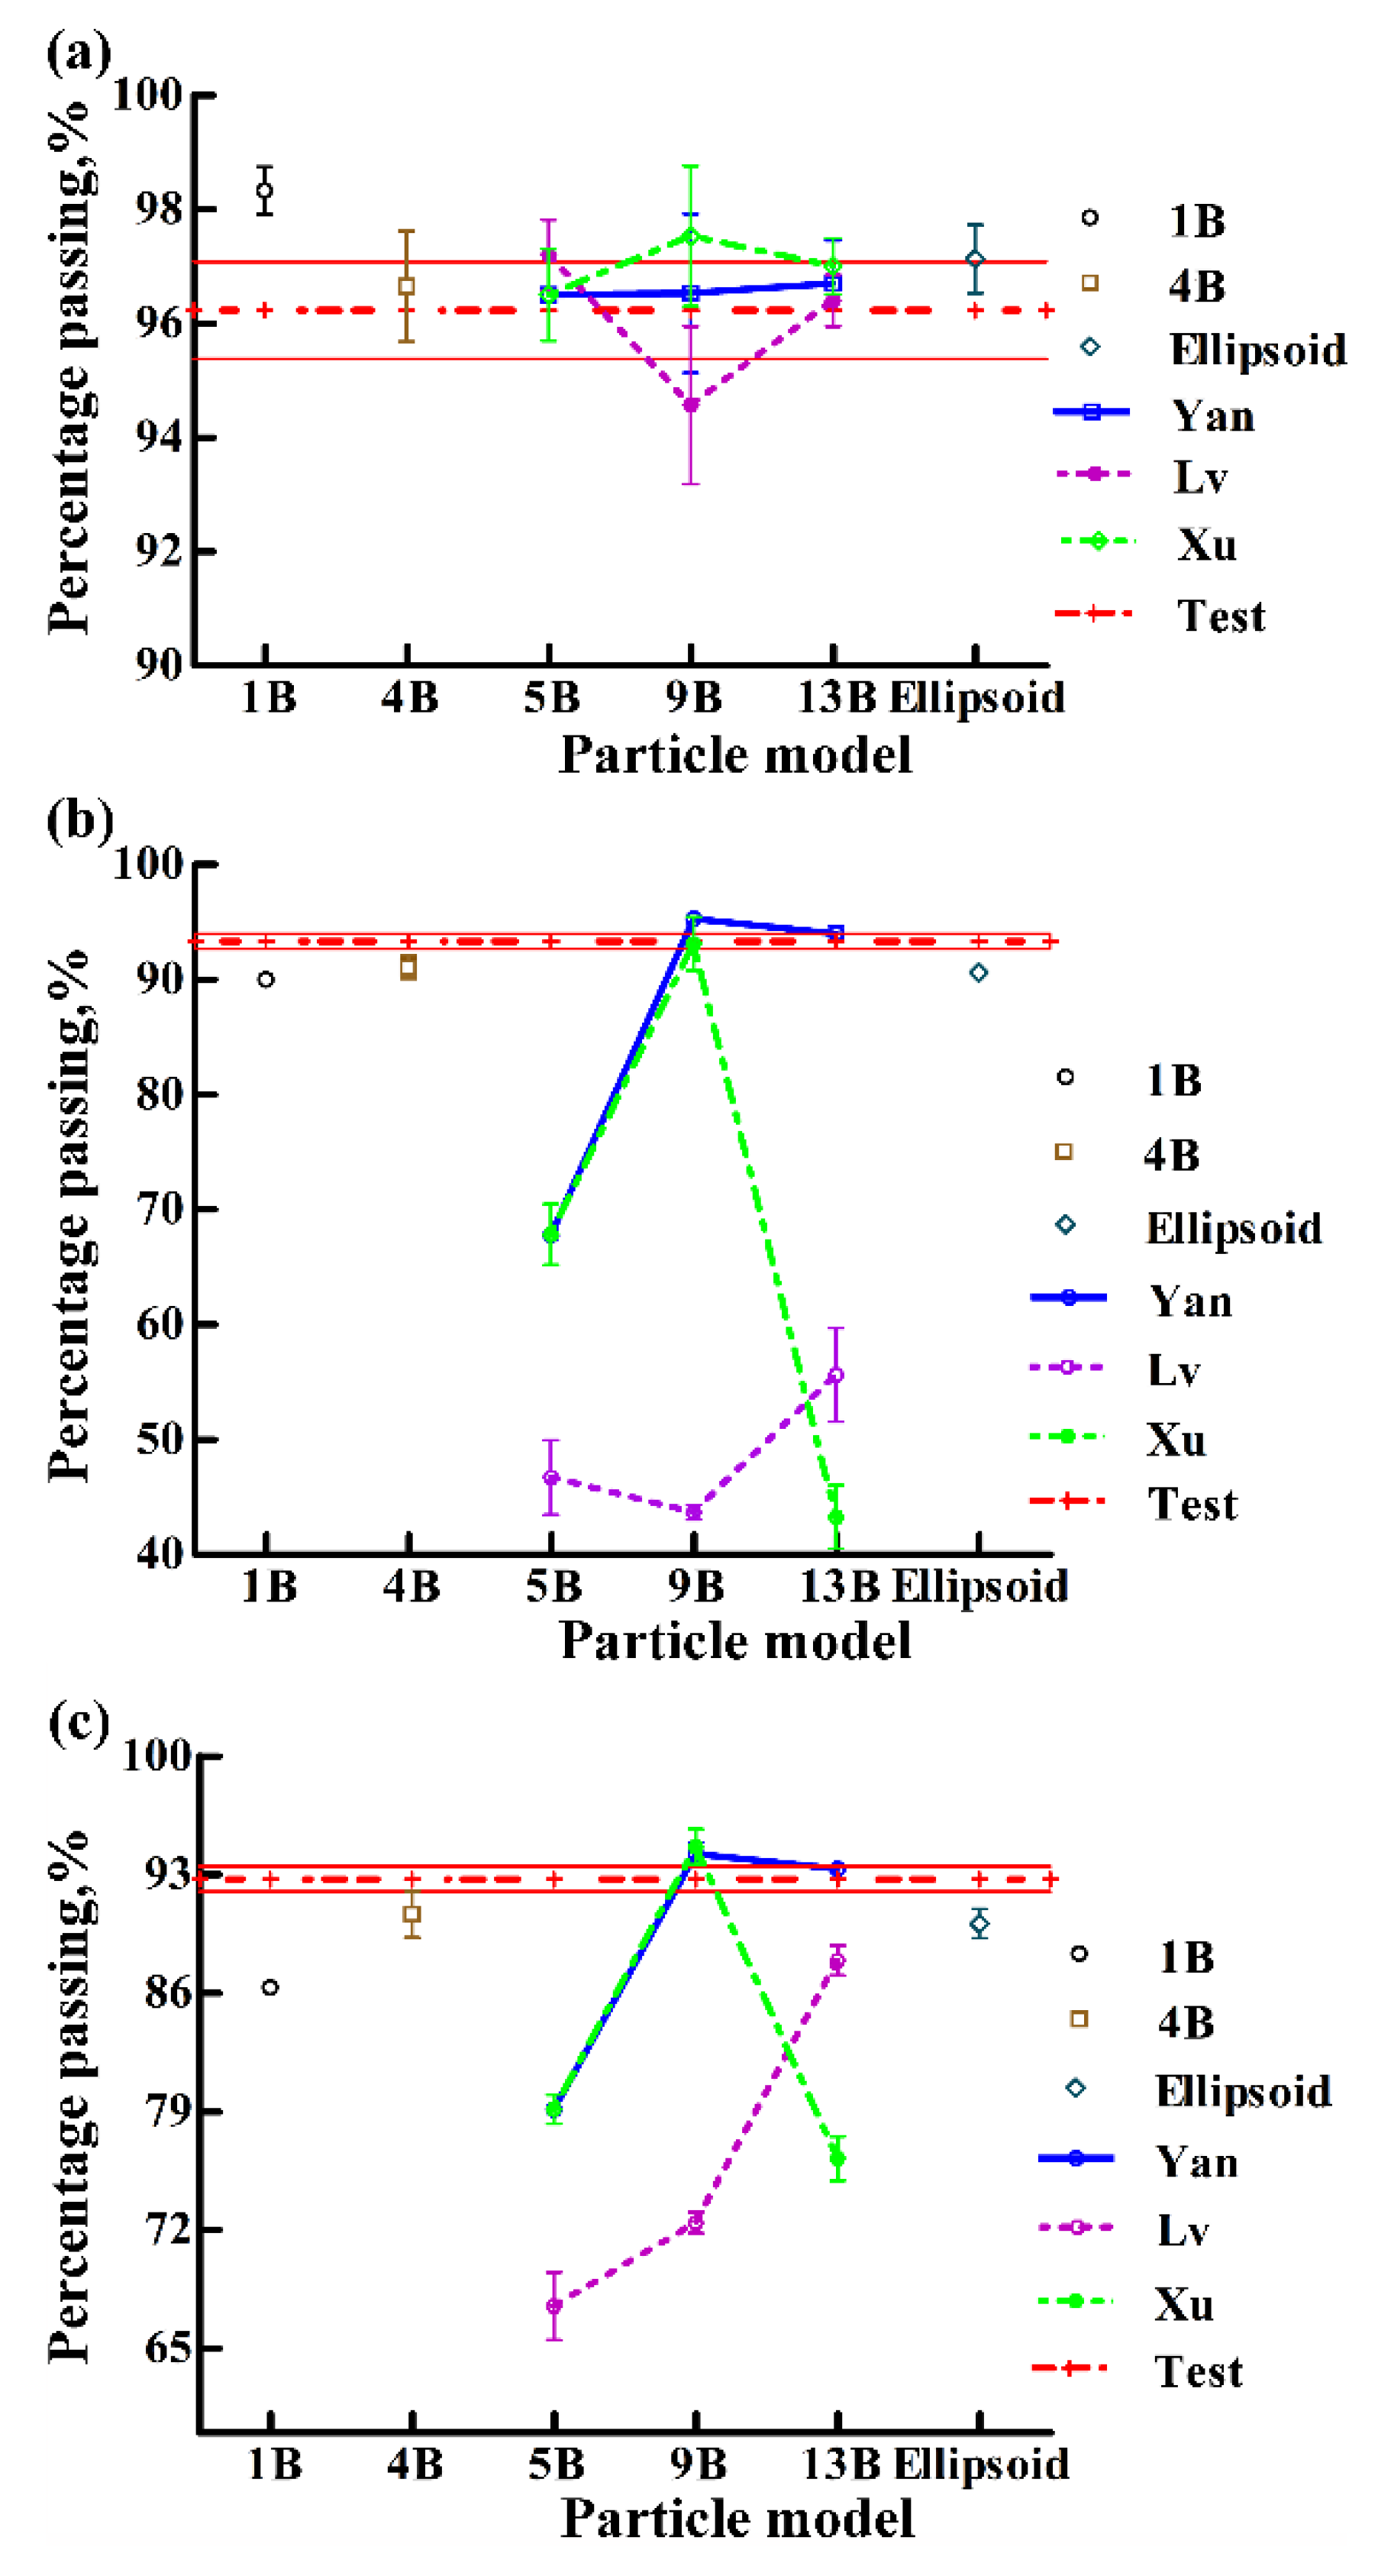 Processes Free Full Text A Comparative Study On The Modelling Of Soybean Particles Based On The Discrete Element Method Html